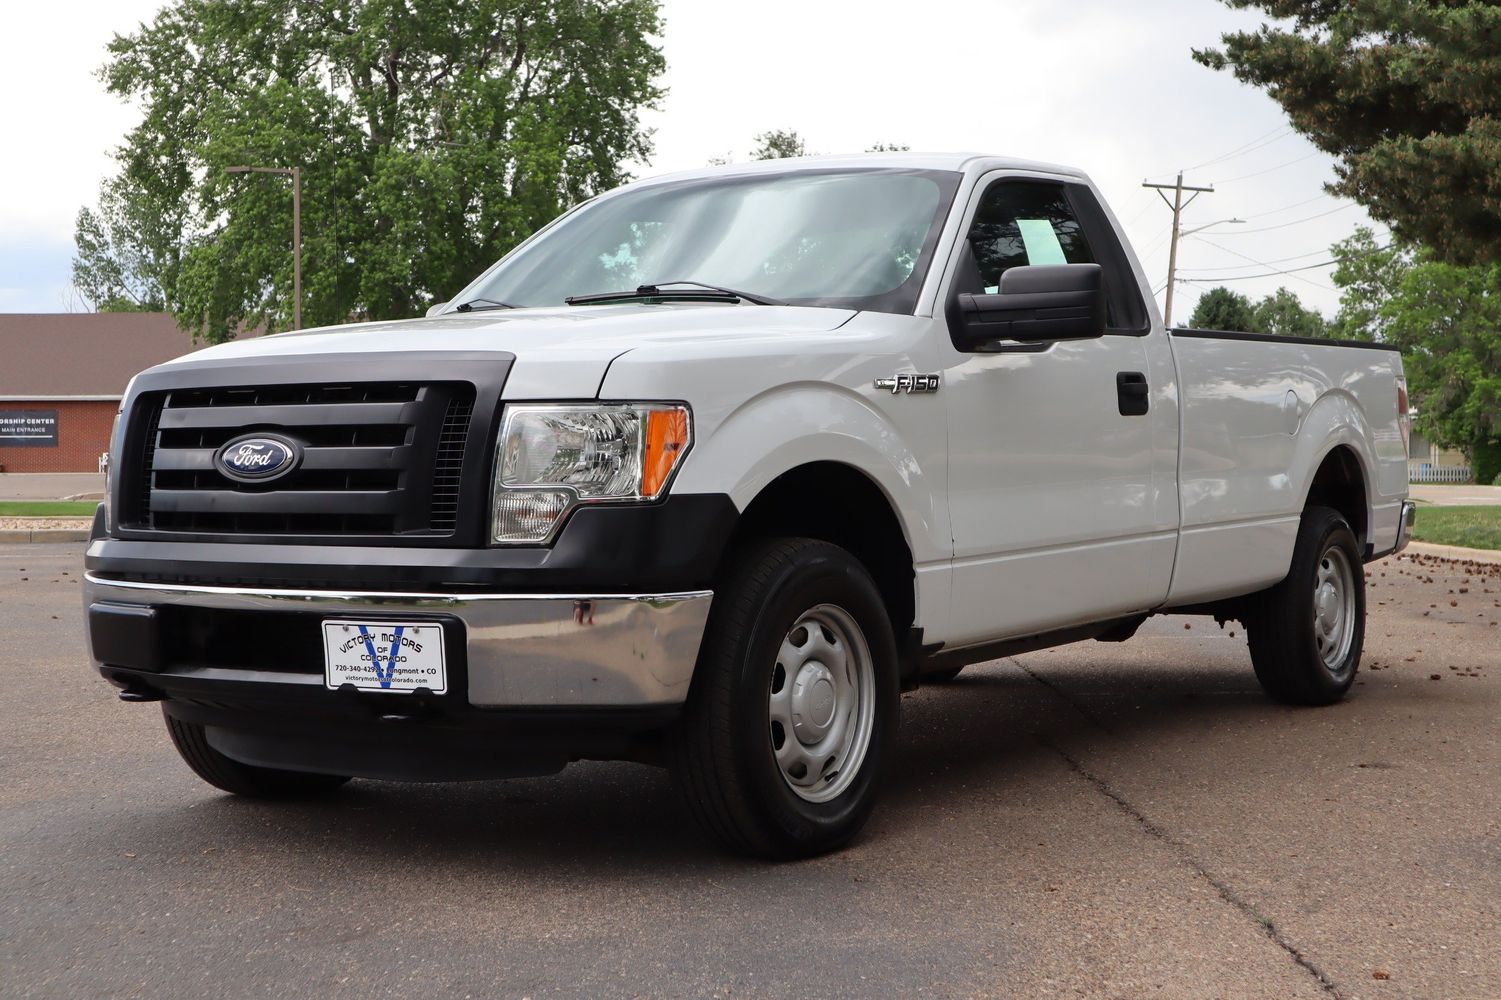 2012 Ford F-150 XL | Victory Motors of Colorado 2012 Ford F 150 3.7 V6 Towing Capacity